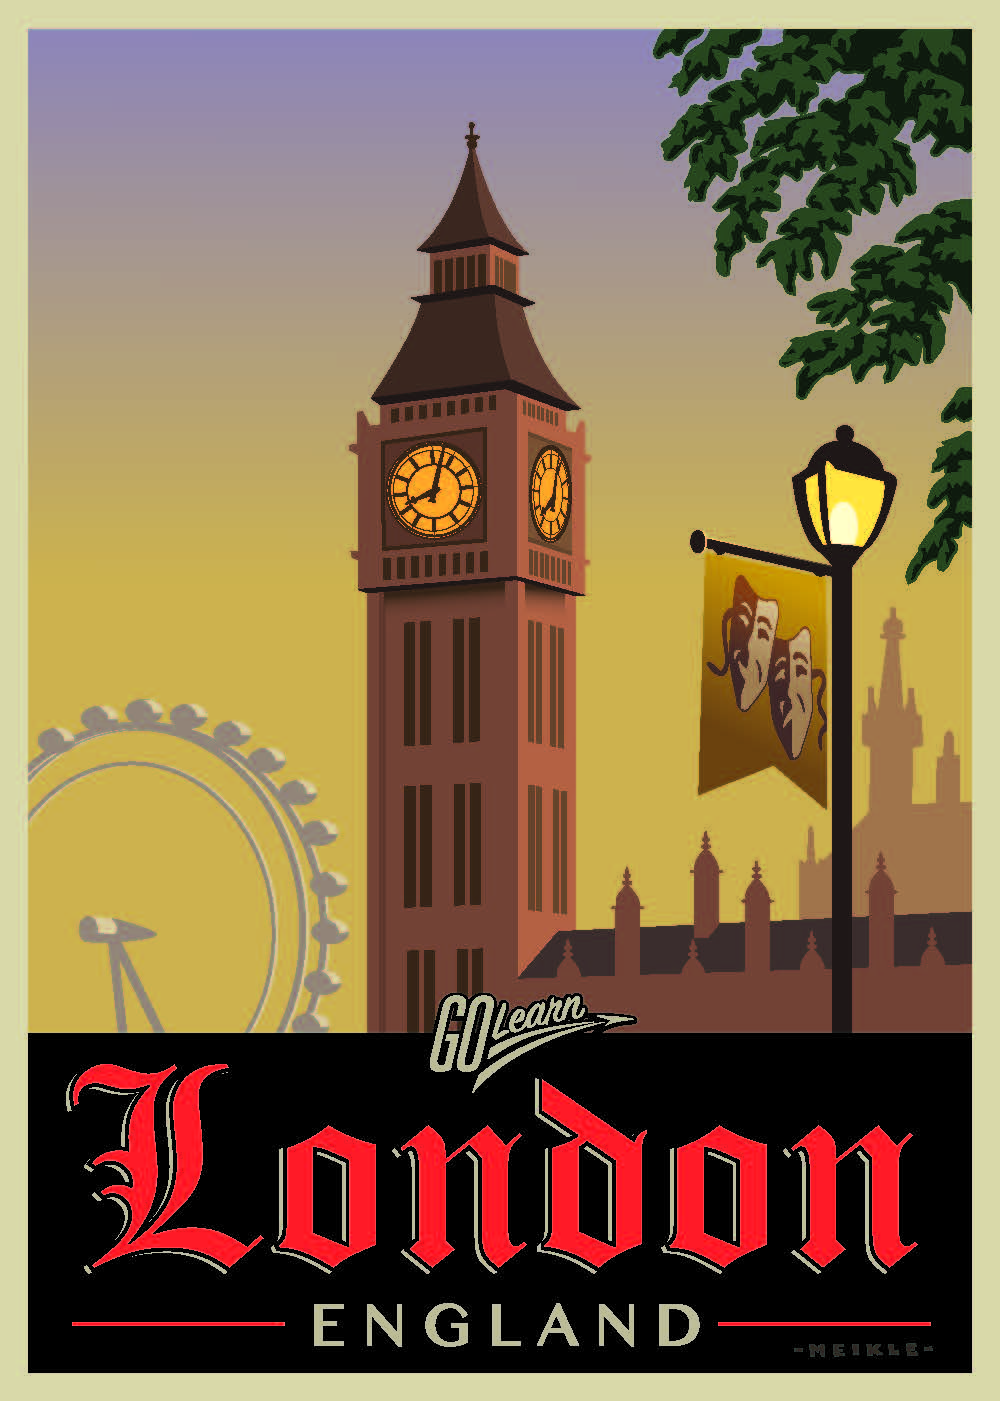 London on Stage Go Learn poster